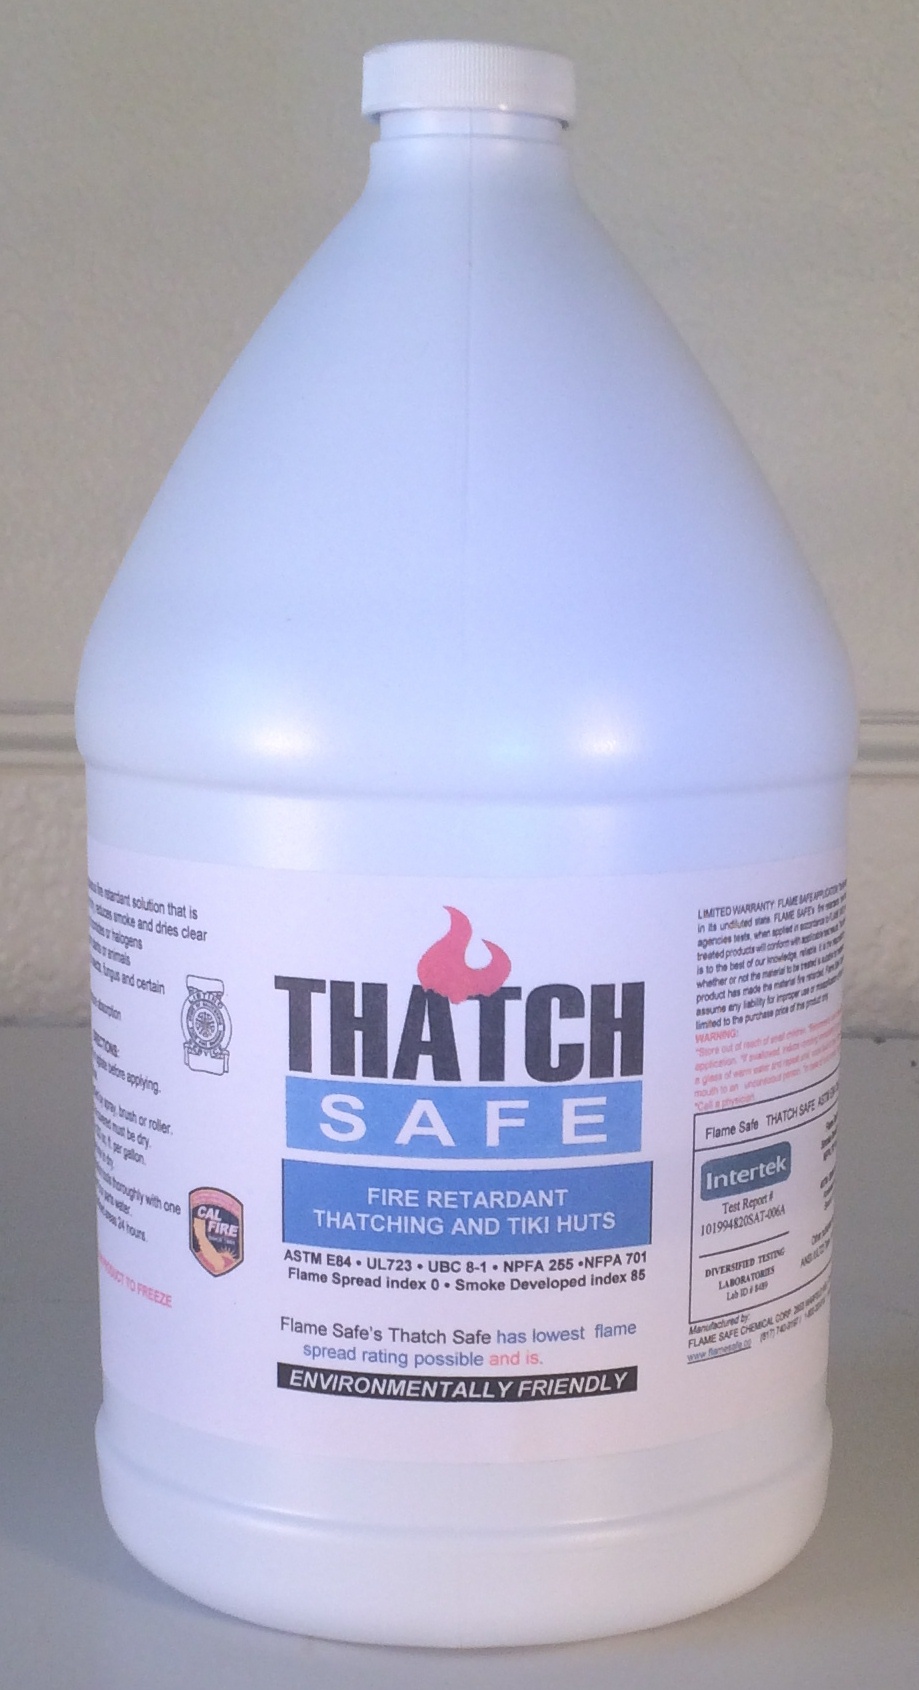 Thatch Safe fire retardant coting in gallon